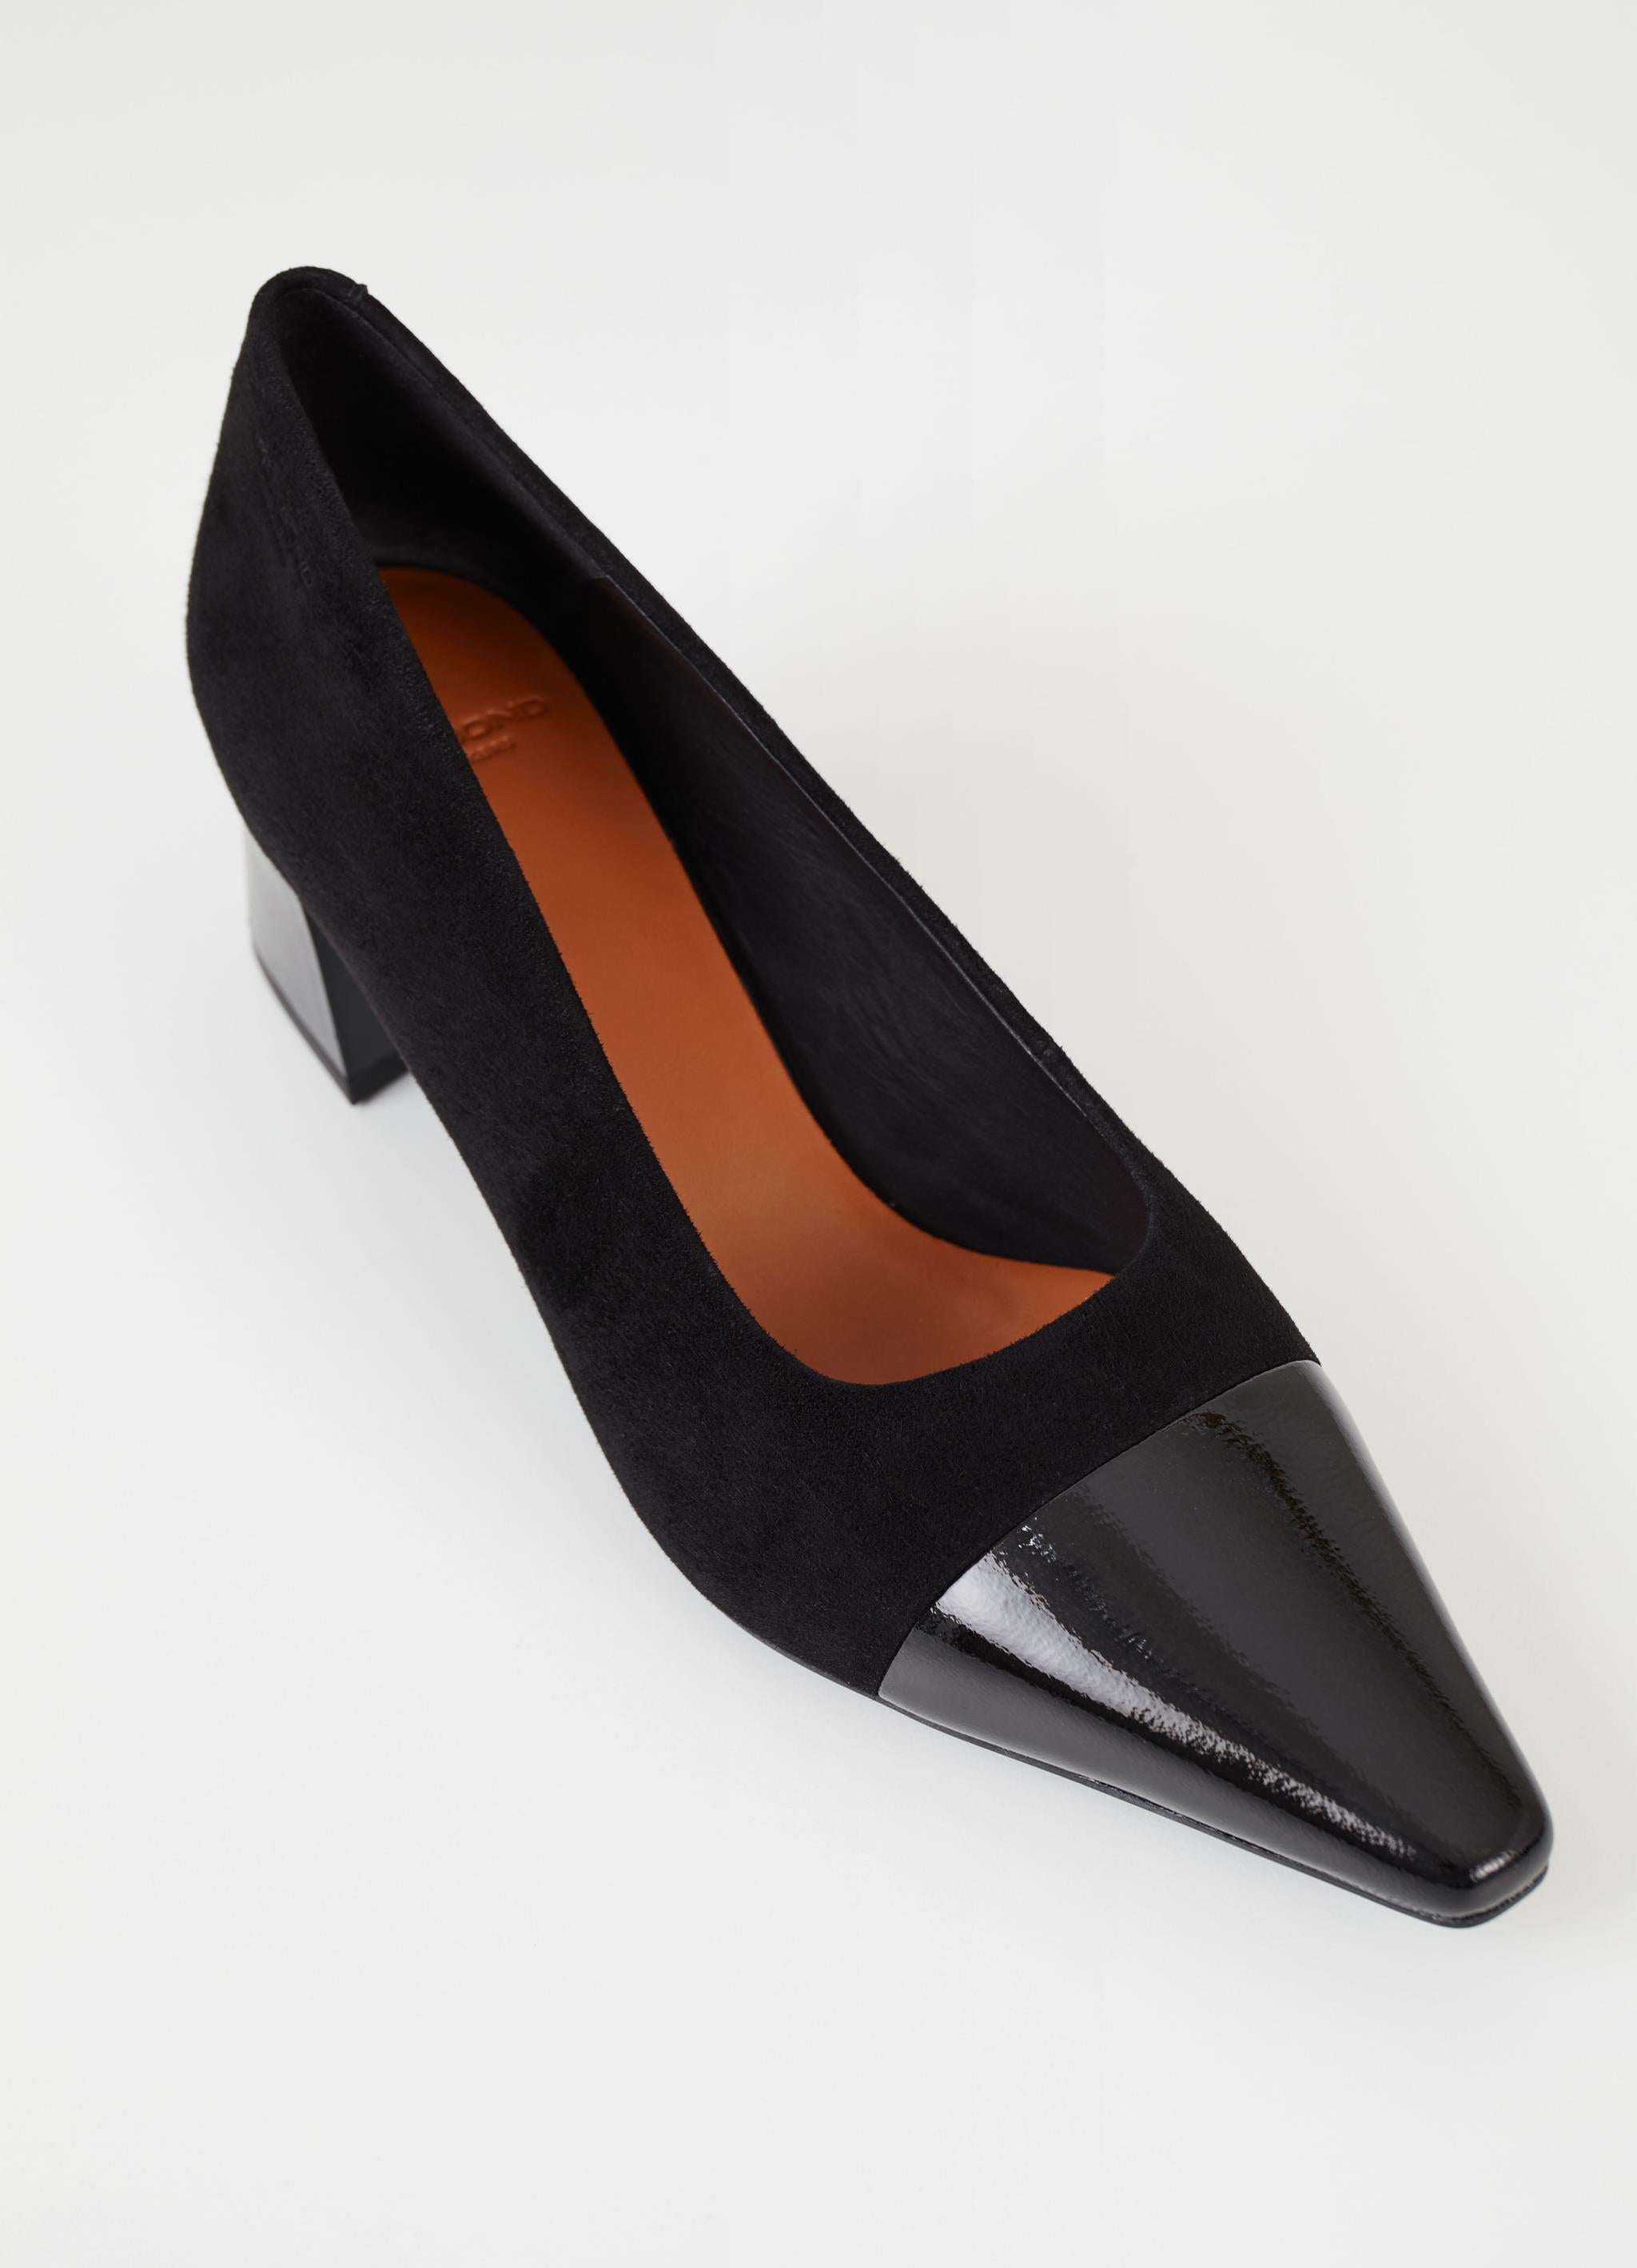 Black suede pumps with stacked black heel and pointed contrast black patent toe